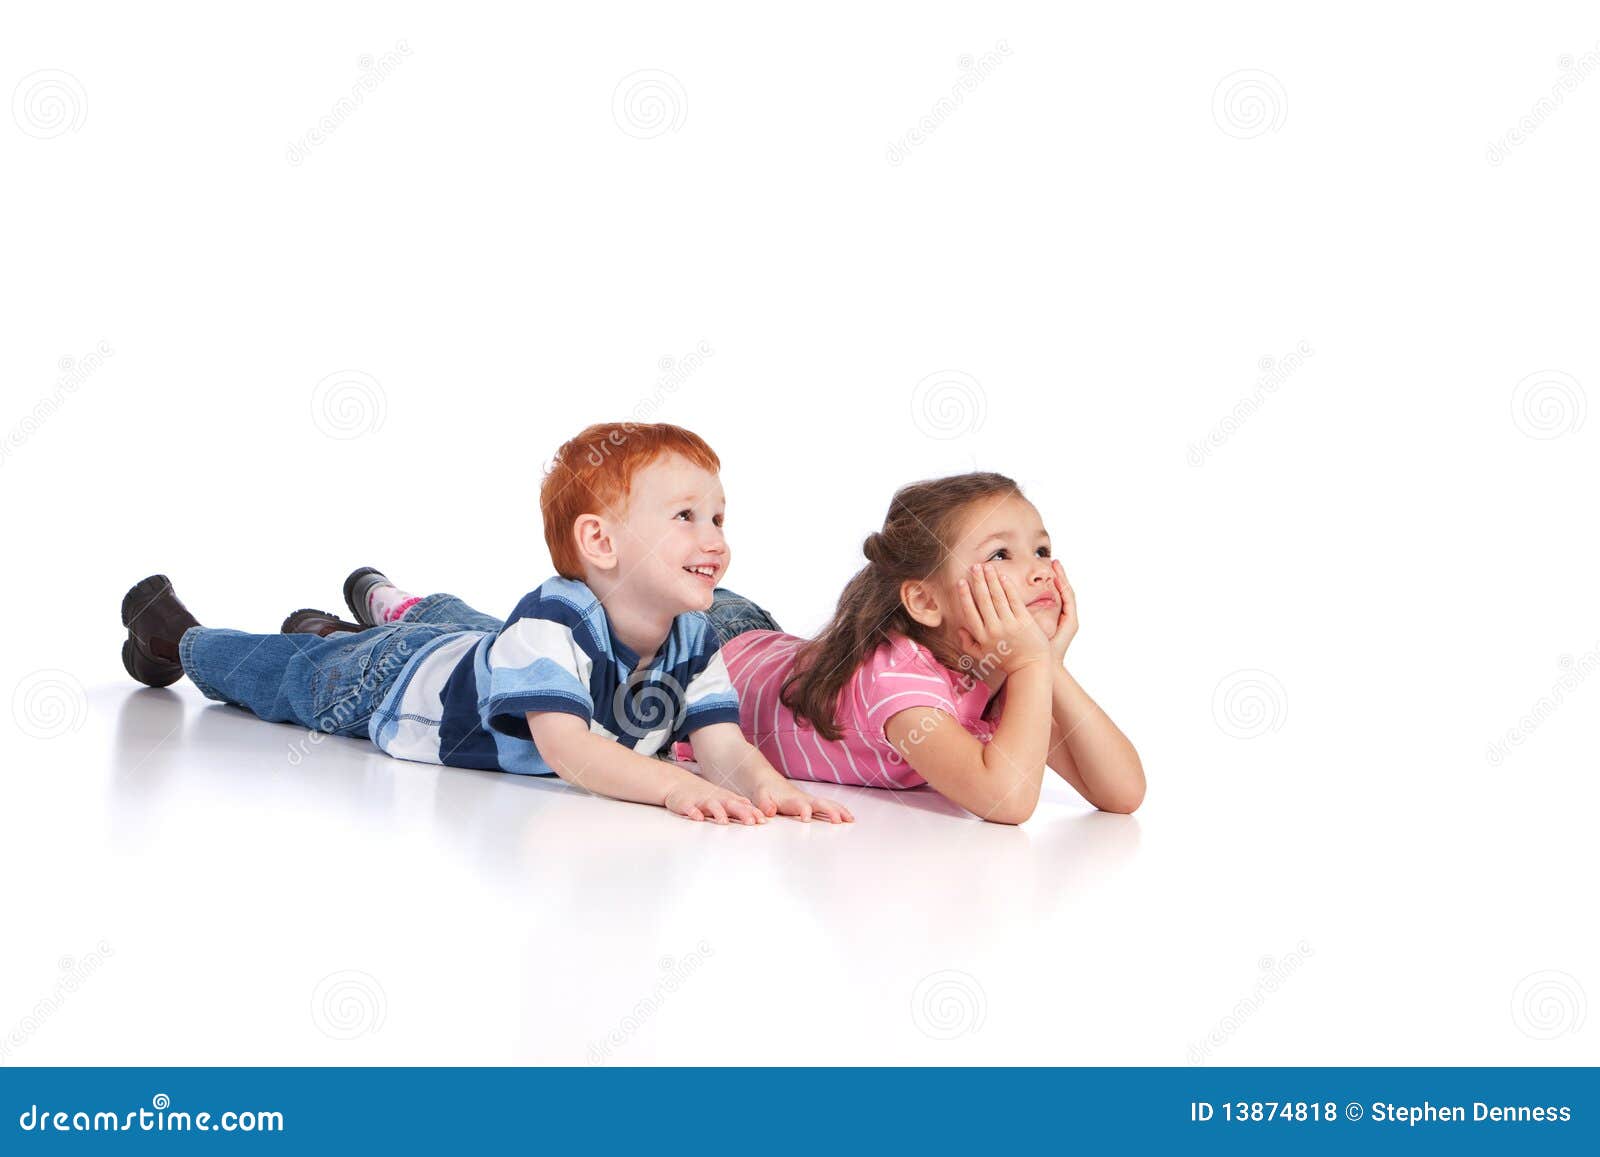 Two Kids Lying On Floor Royalty Free Stock Photos - Image ...